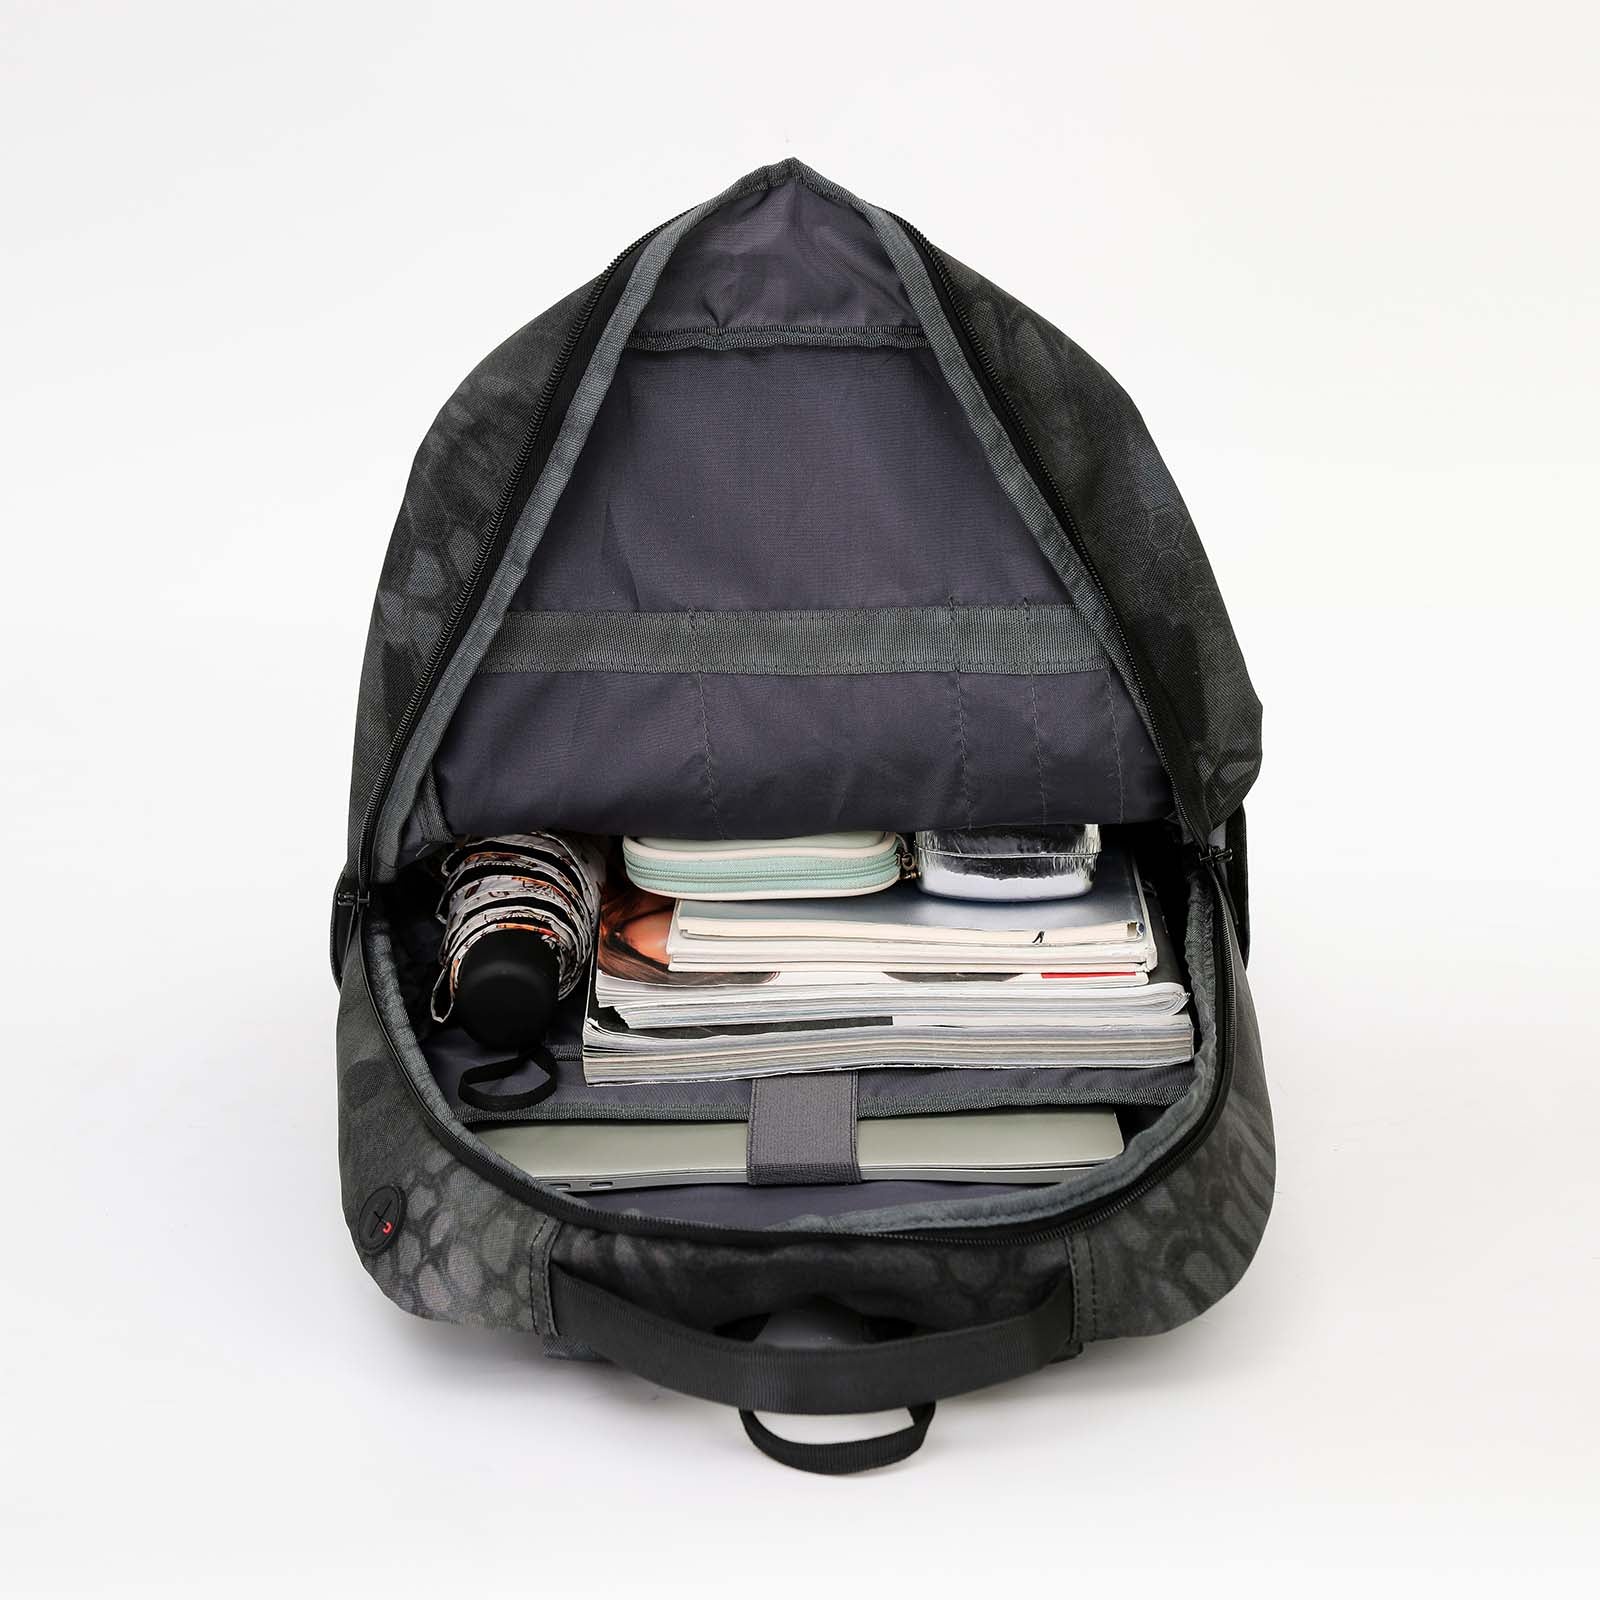 tosca-laptop-compartment-backpack-35l-grey-camo-open